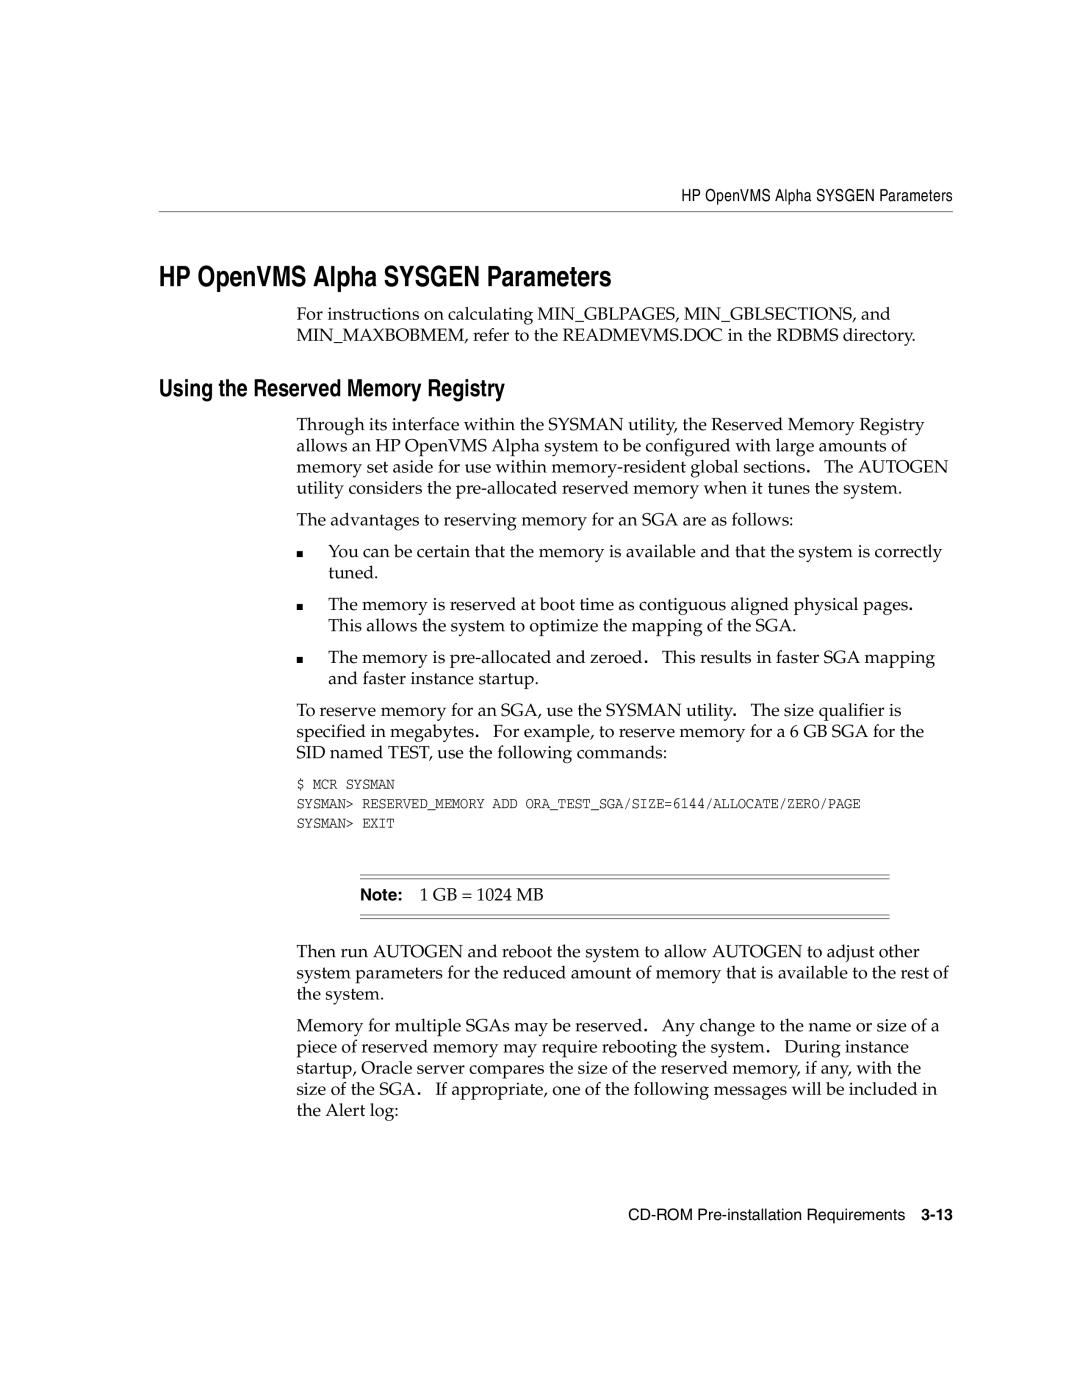 Oracle Audio Technologies B10508-01 manual HP OpenVMS Alpha Sysgen Parameters, Using the Reserved Memory Registry 